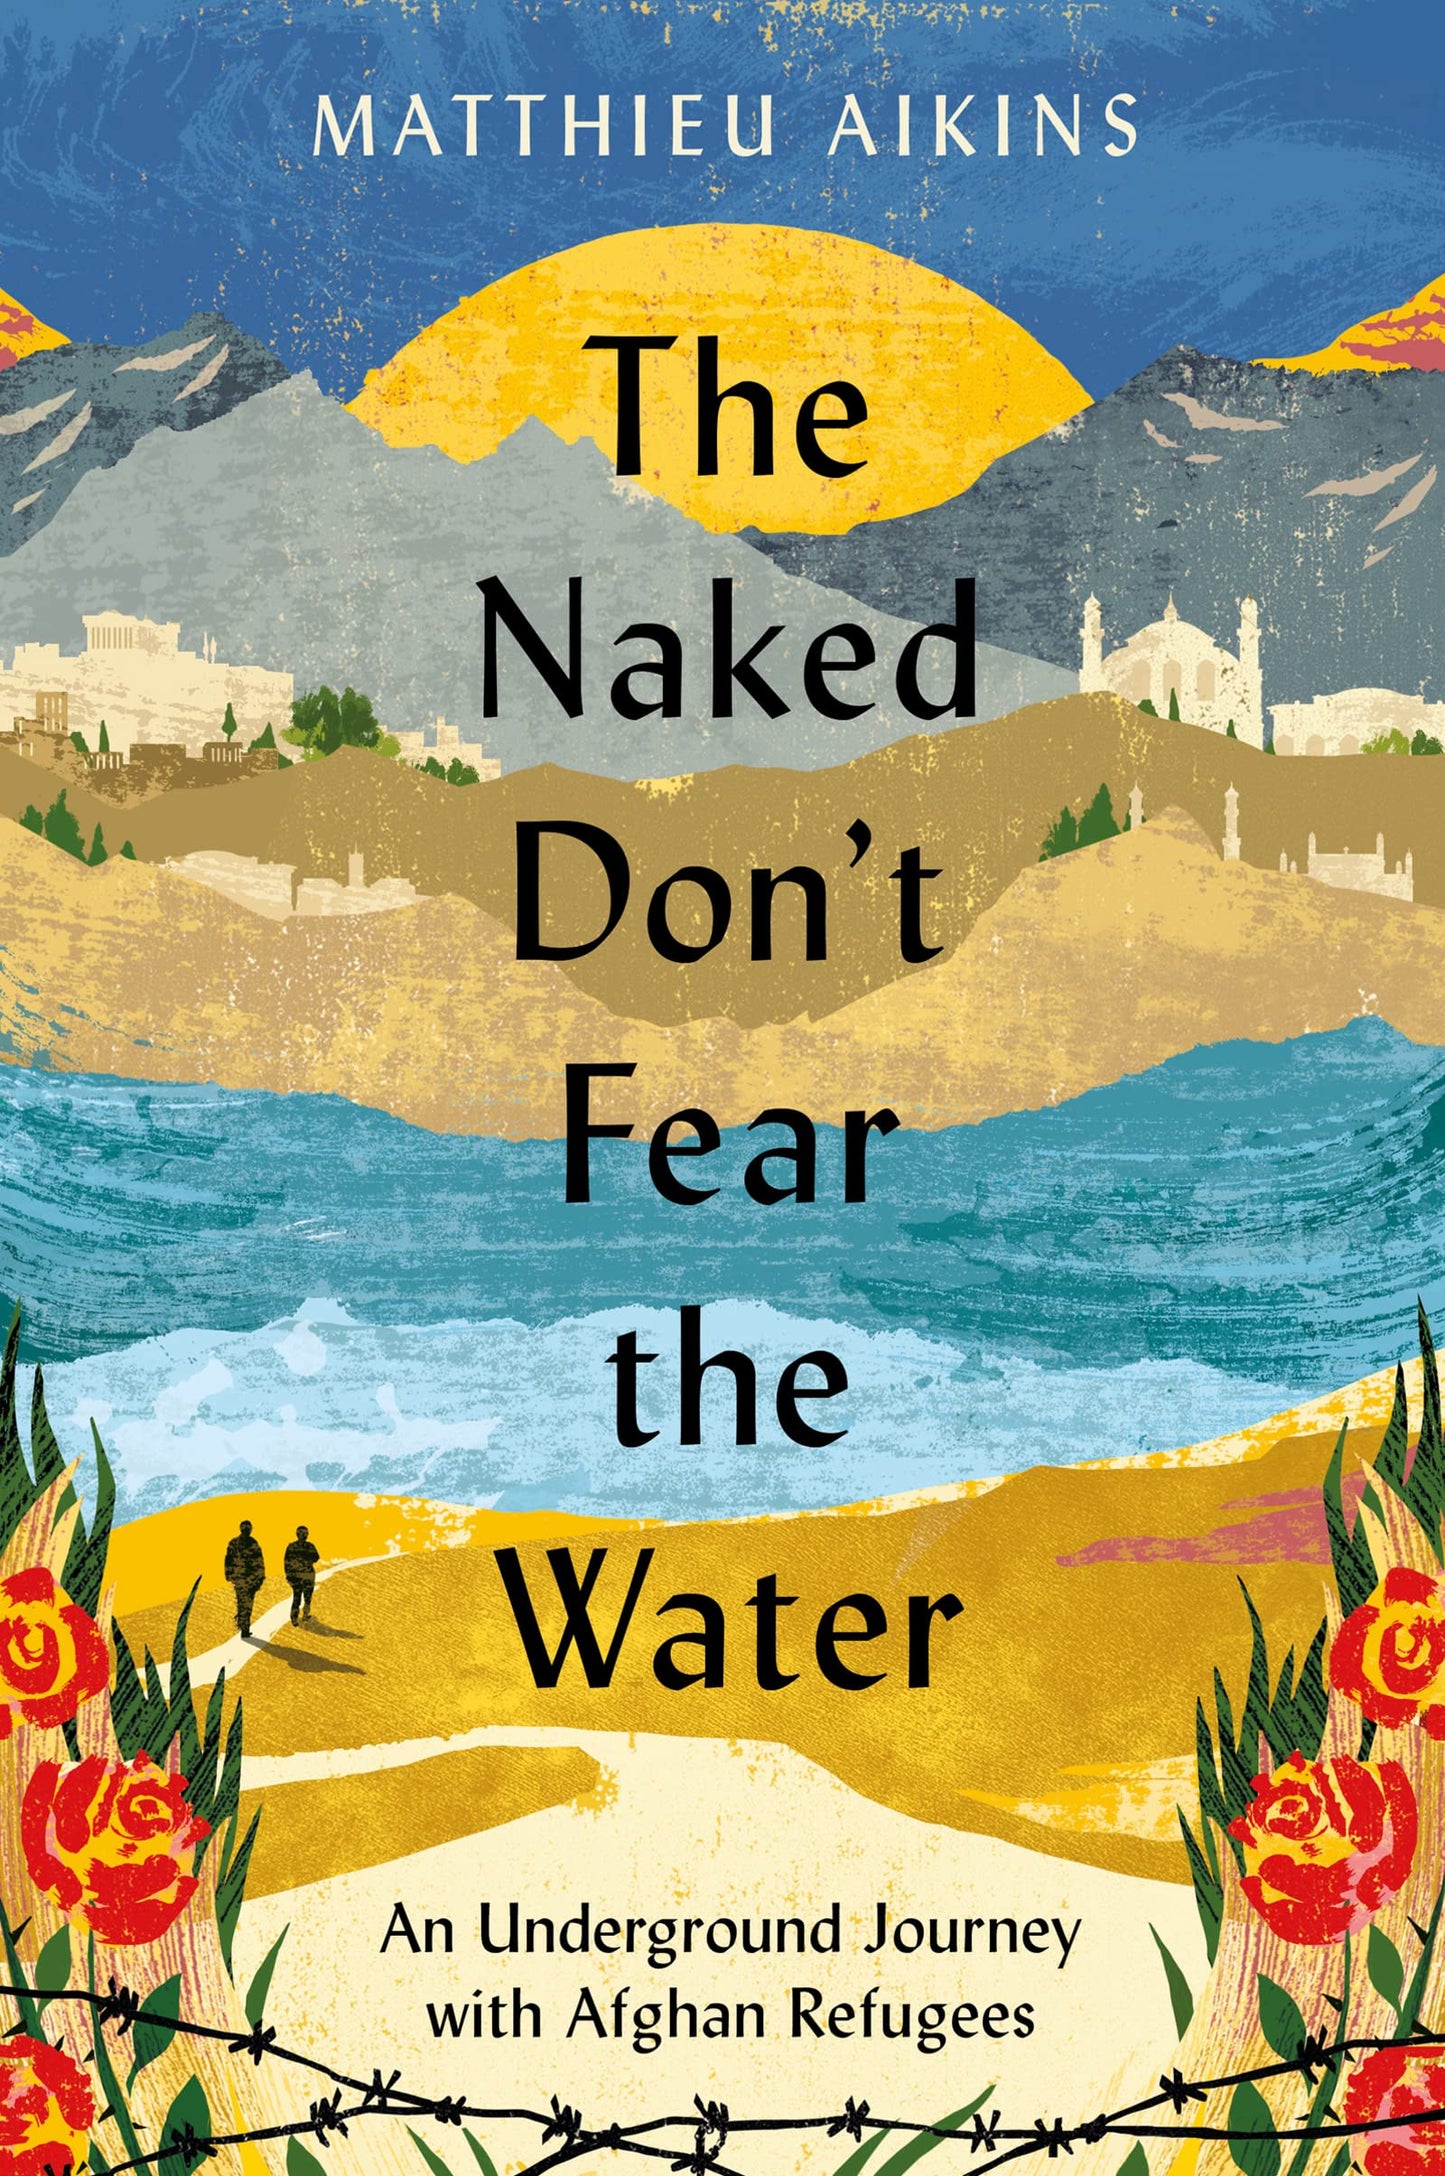 Naked Don't Fear the Water: An Underground Journey with Afghan Refugees